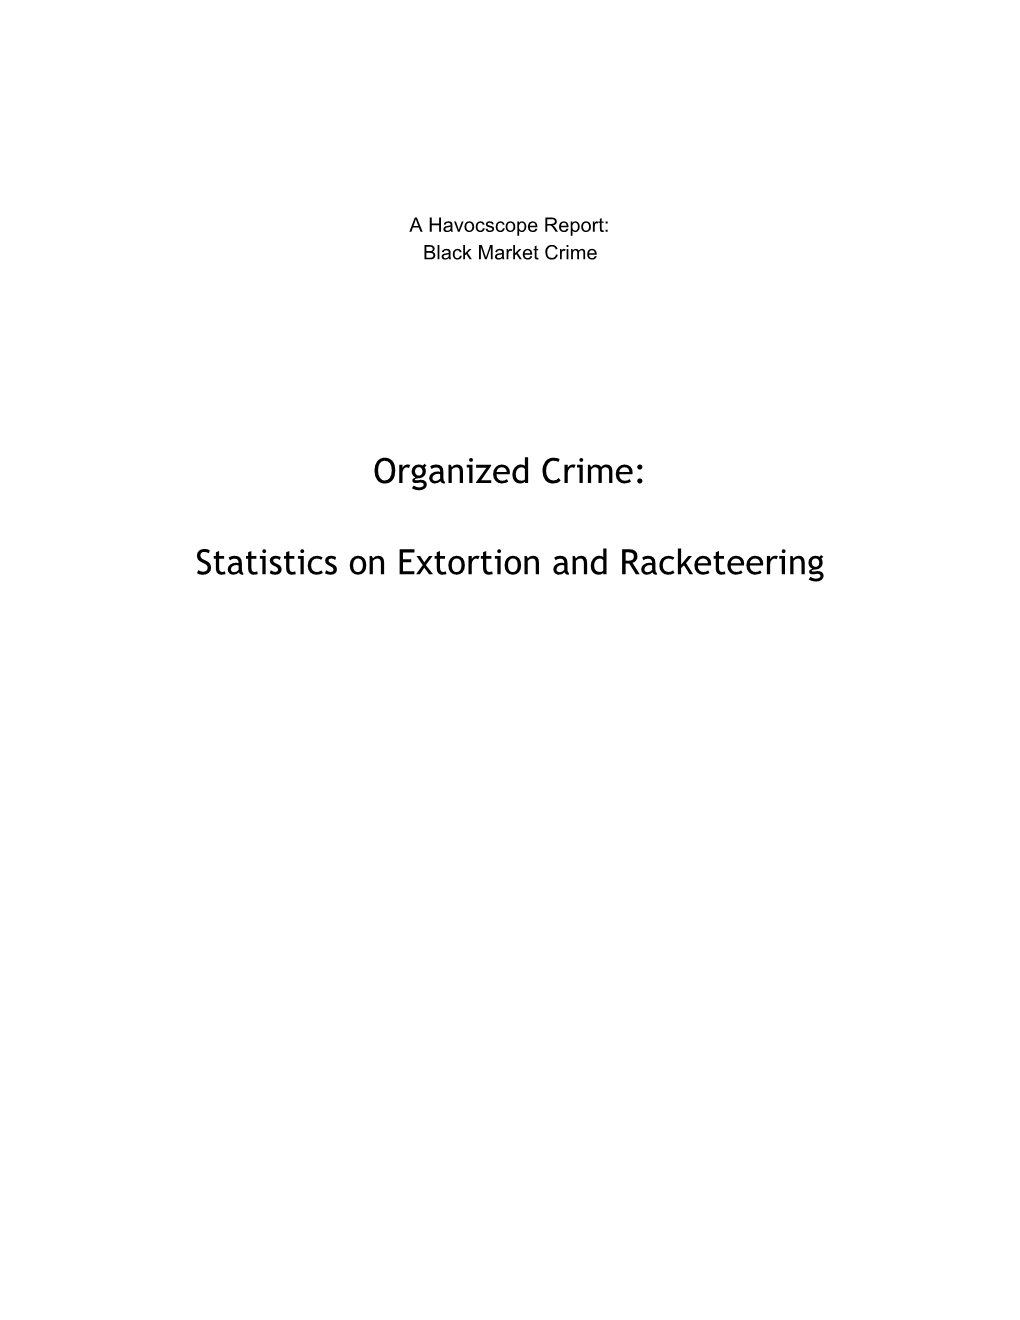 Organized Crime: Statistics on Extortion and Racketeering